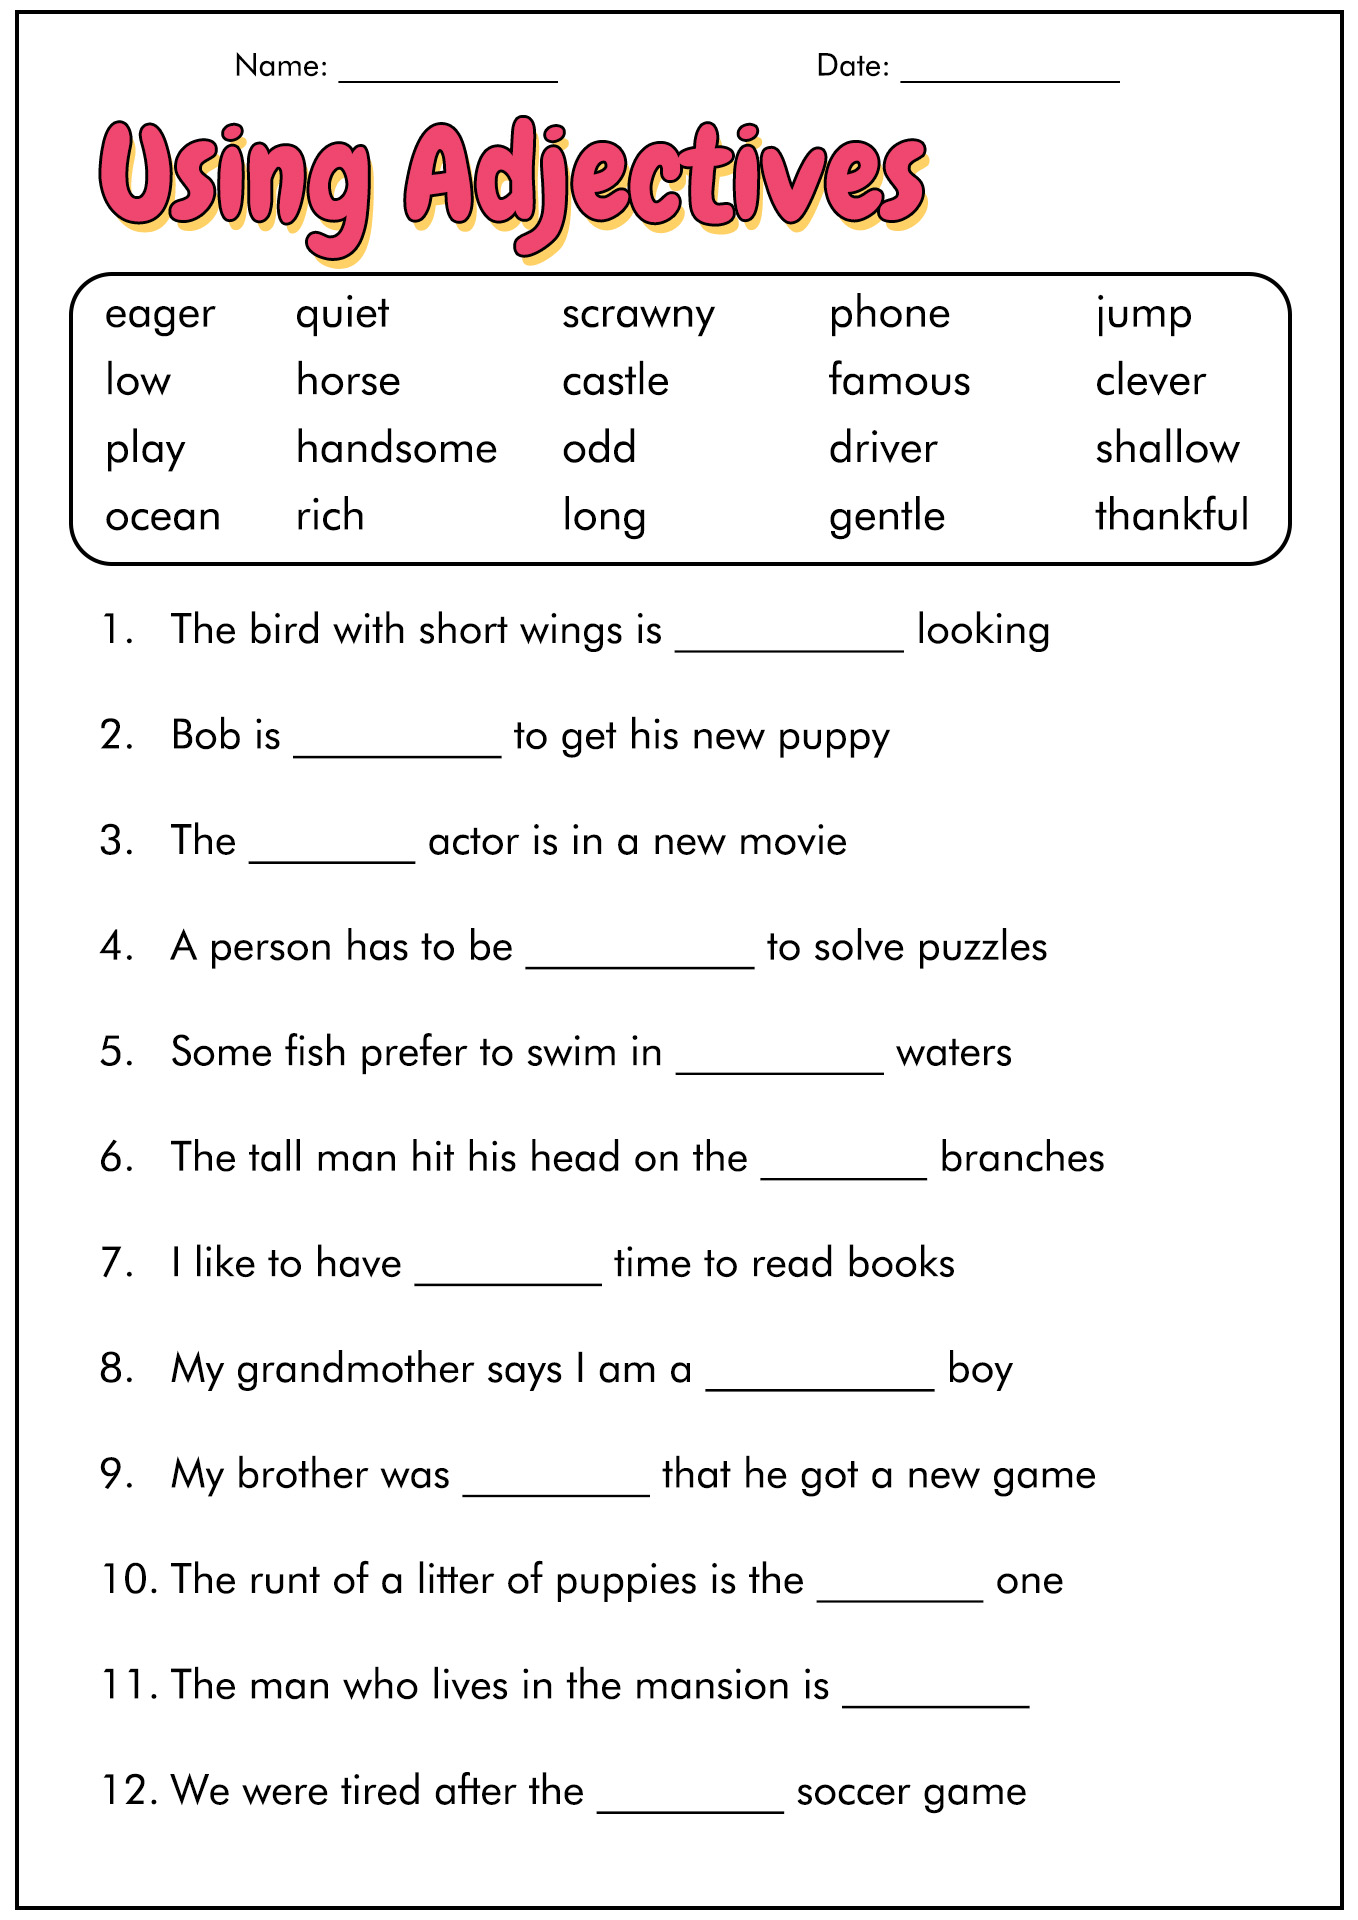 14-best-images-of-3rd-4th-grade-math-worksheets-4th-grade-math